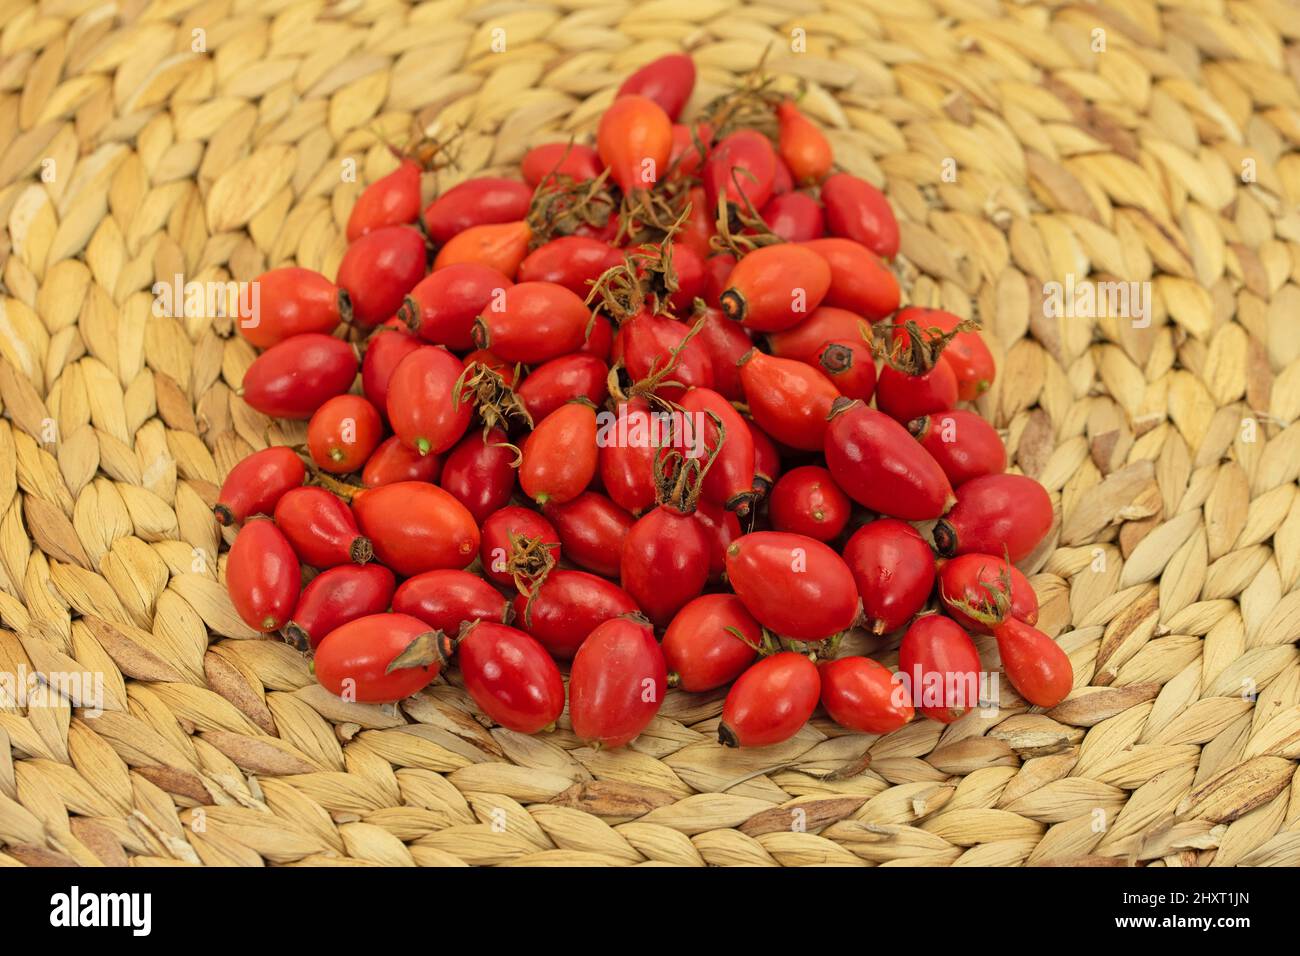 Ripe harvested rose hips on a bast bowl Stock Photo